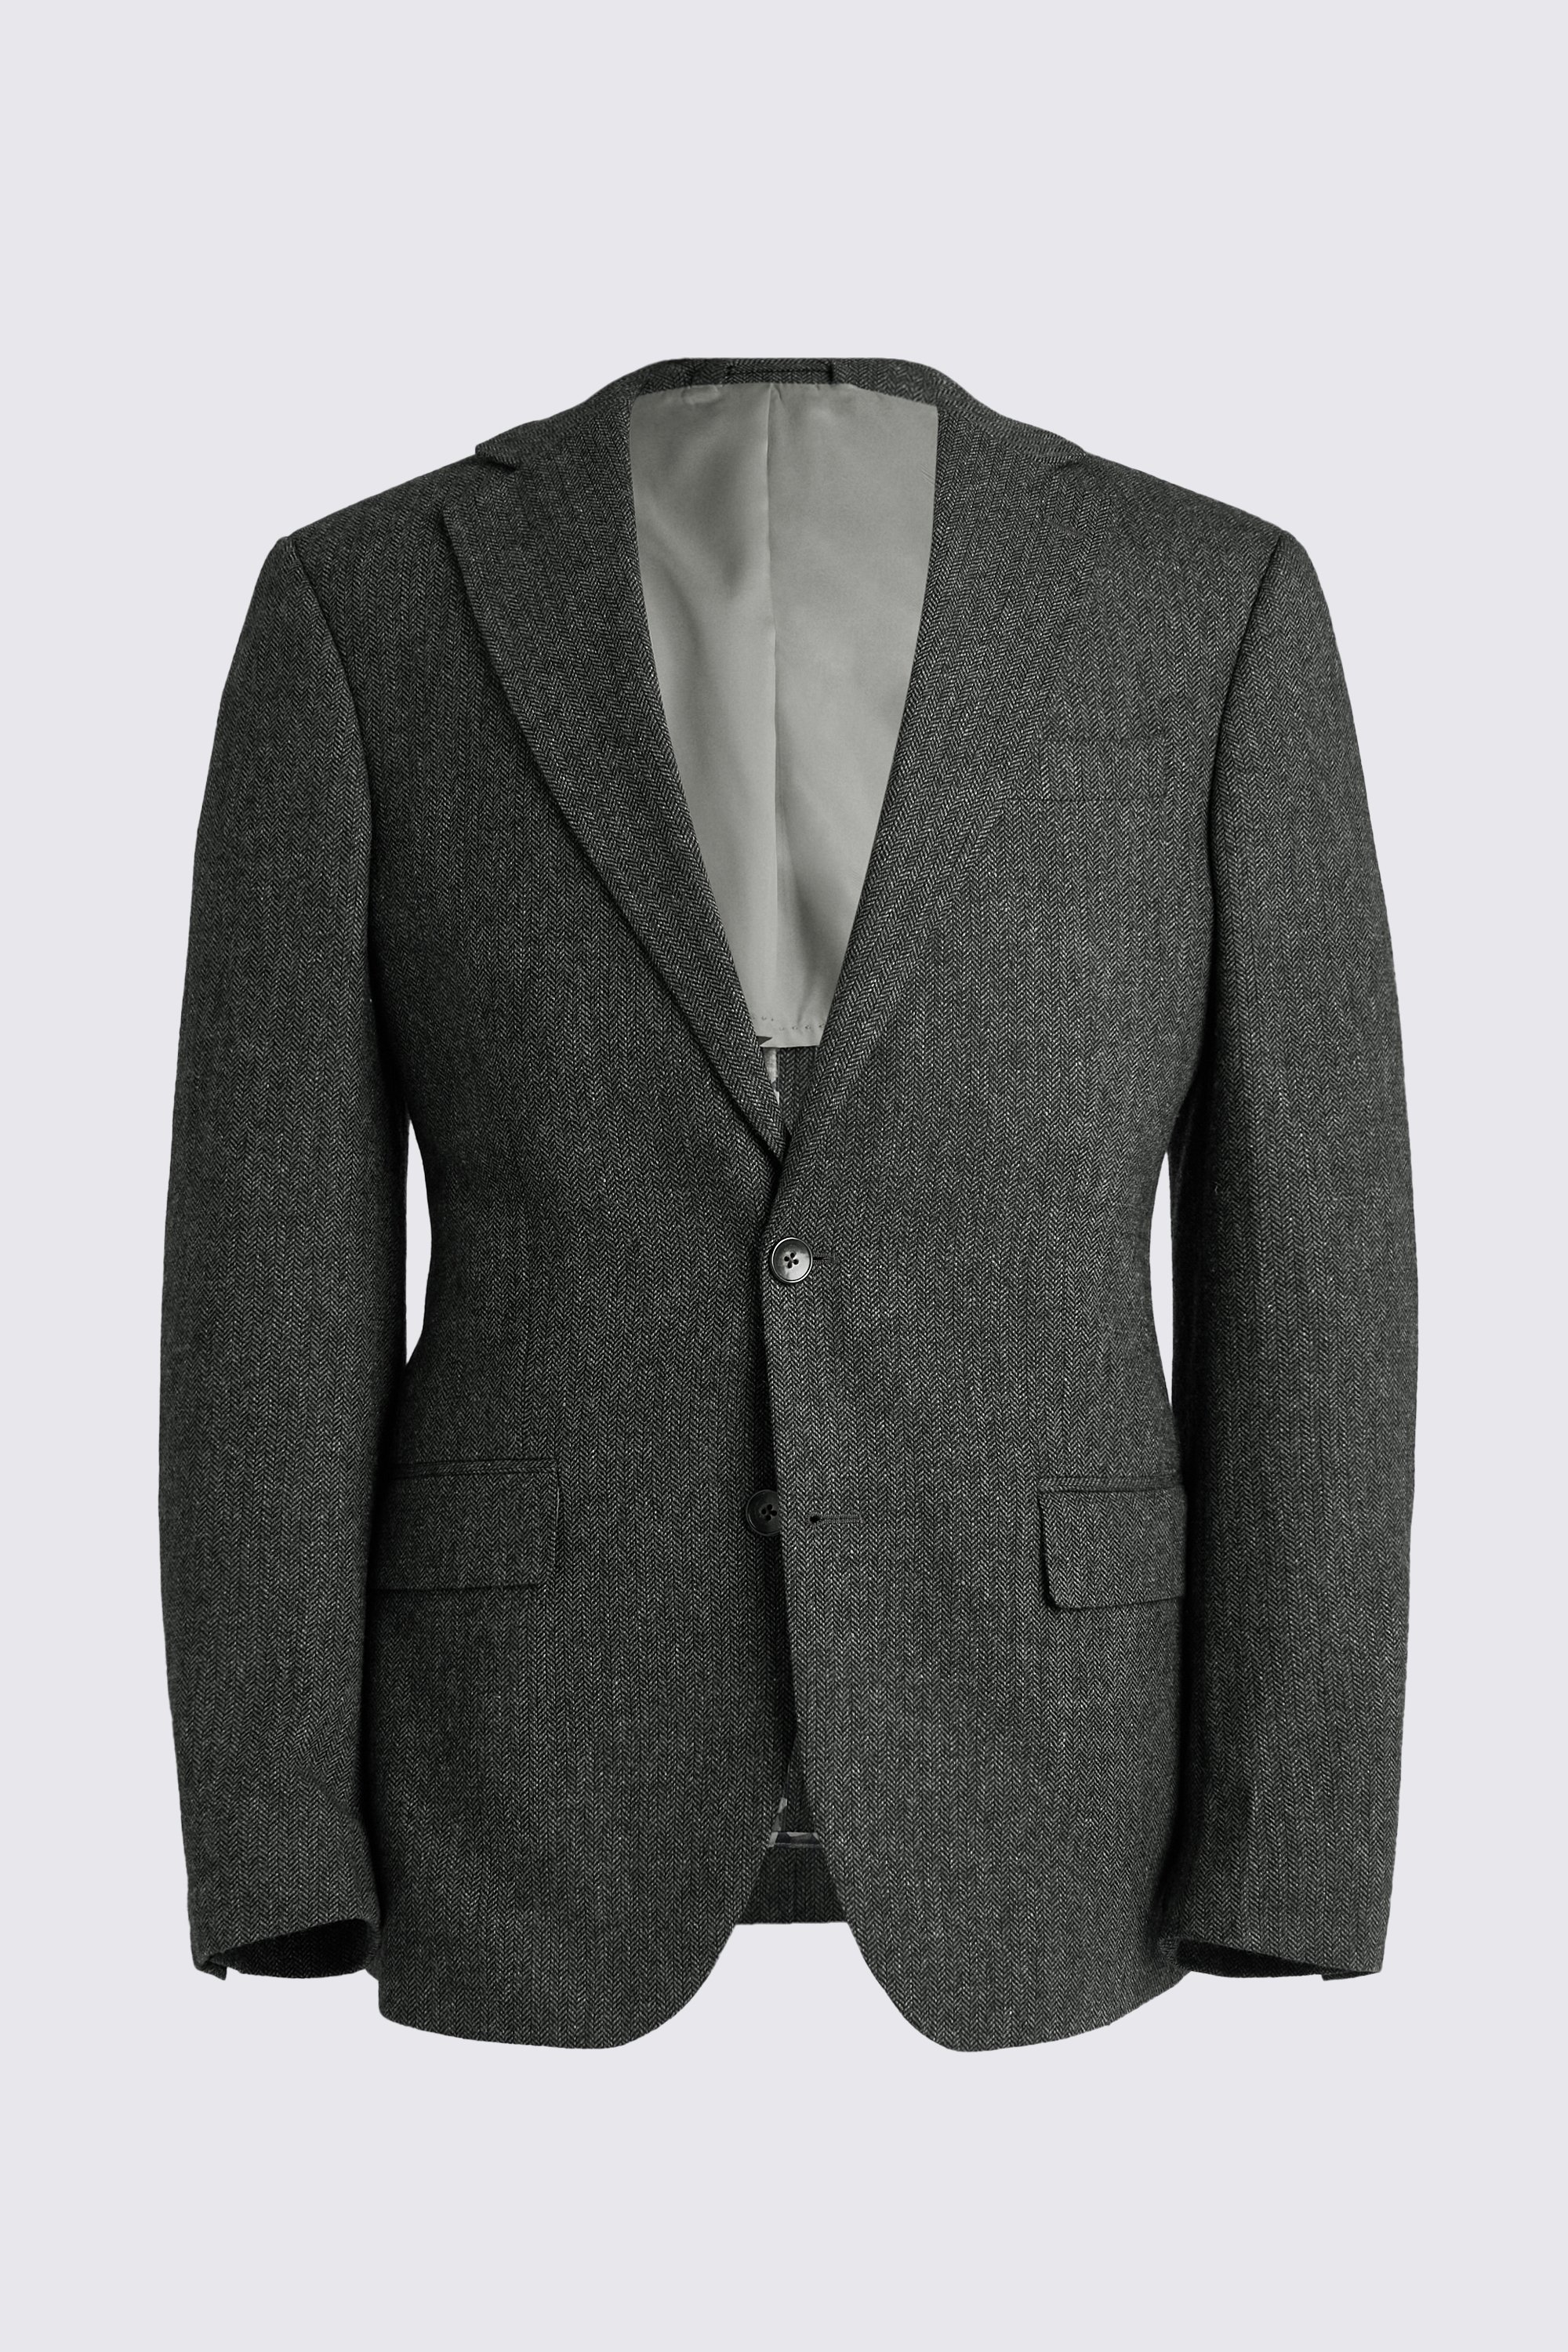 Tailored Fit Olive Herringbone Jacket | Buy Online at Moss